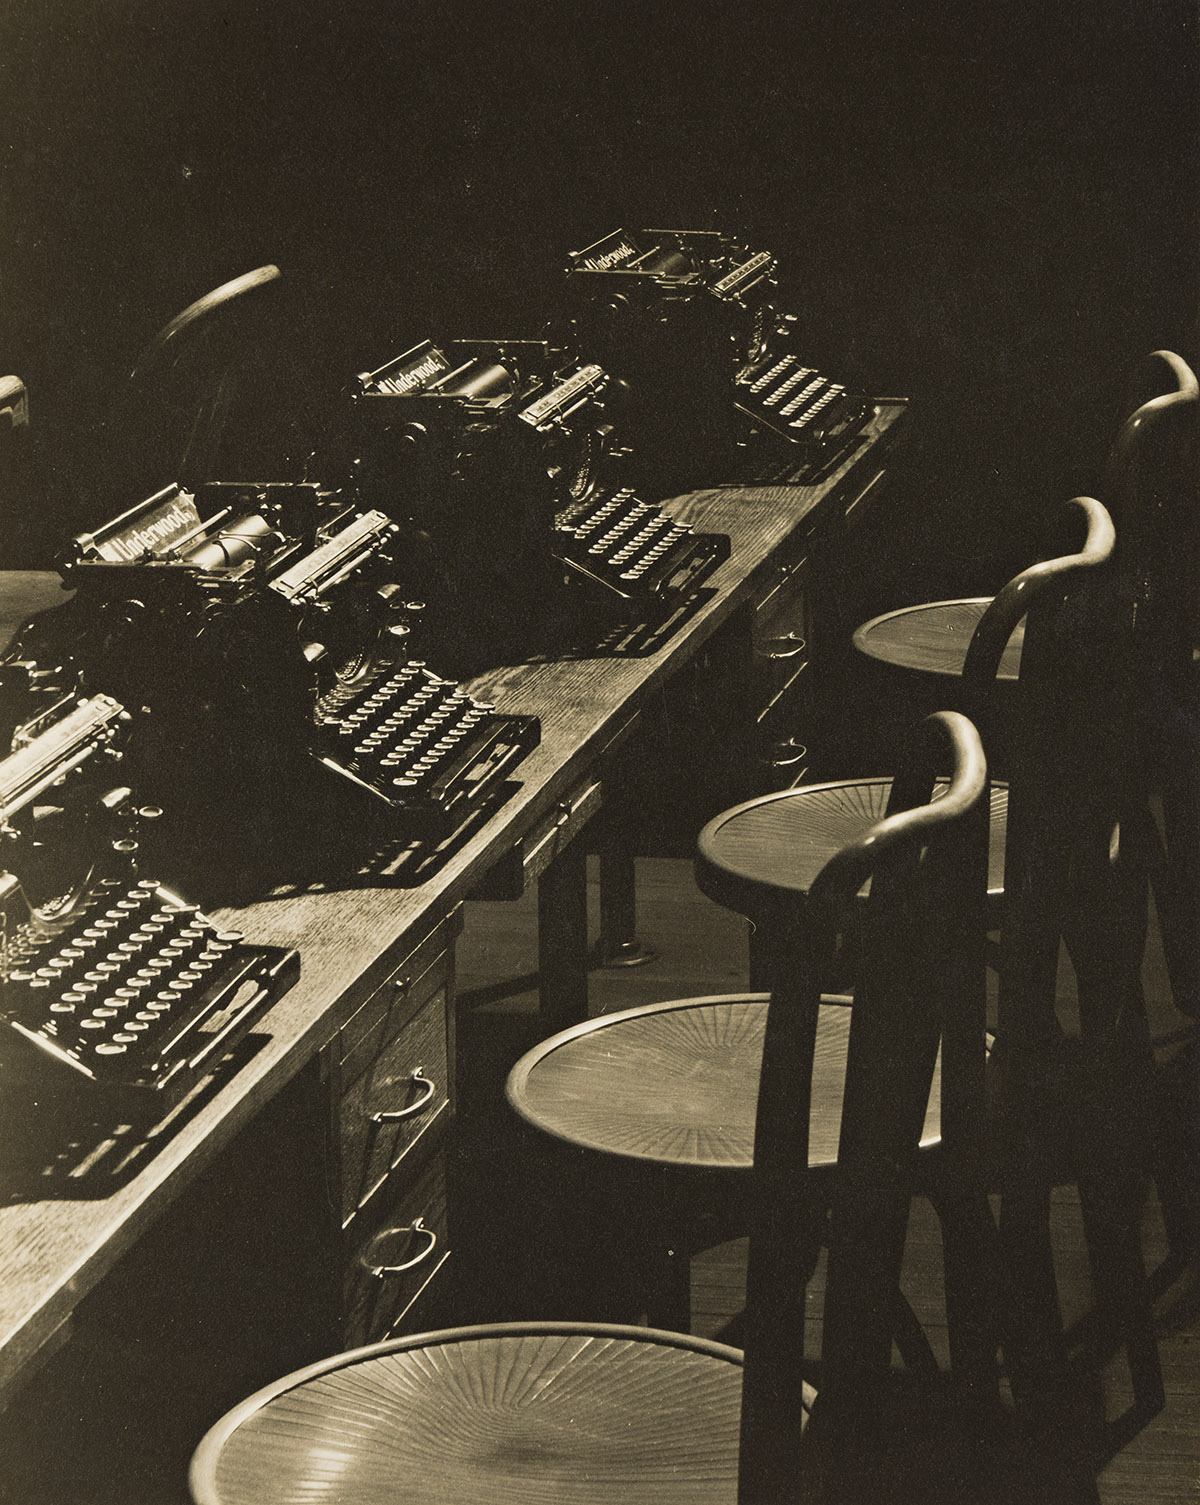 WENDELL MACRAE (1896-1980) Row of Empty Stools and Typewriters.